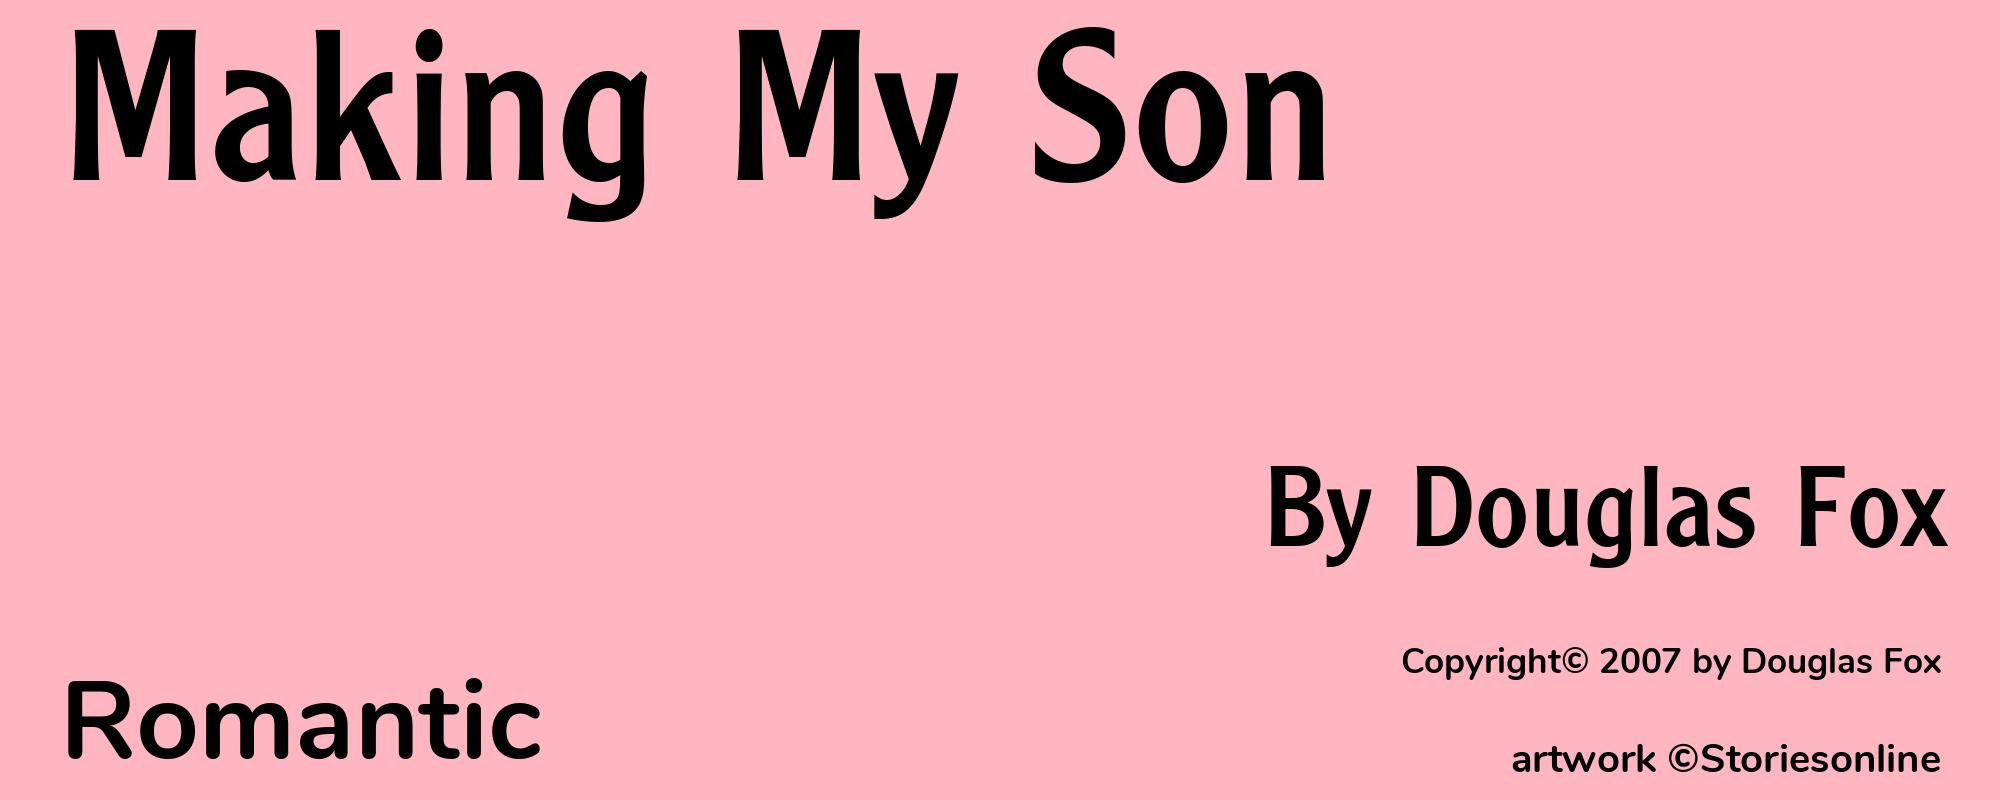 Making My Son - Cover